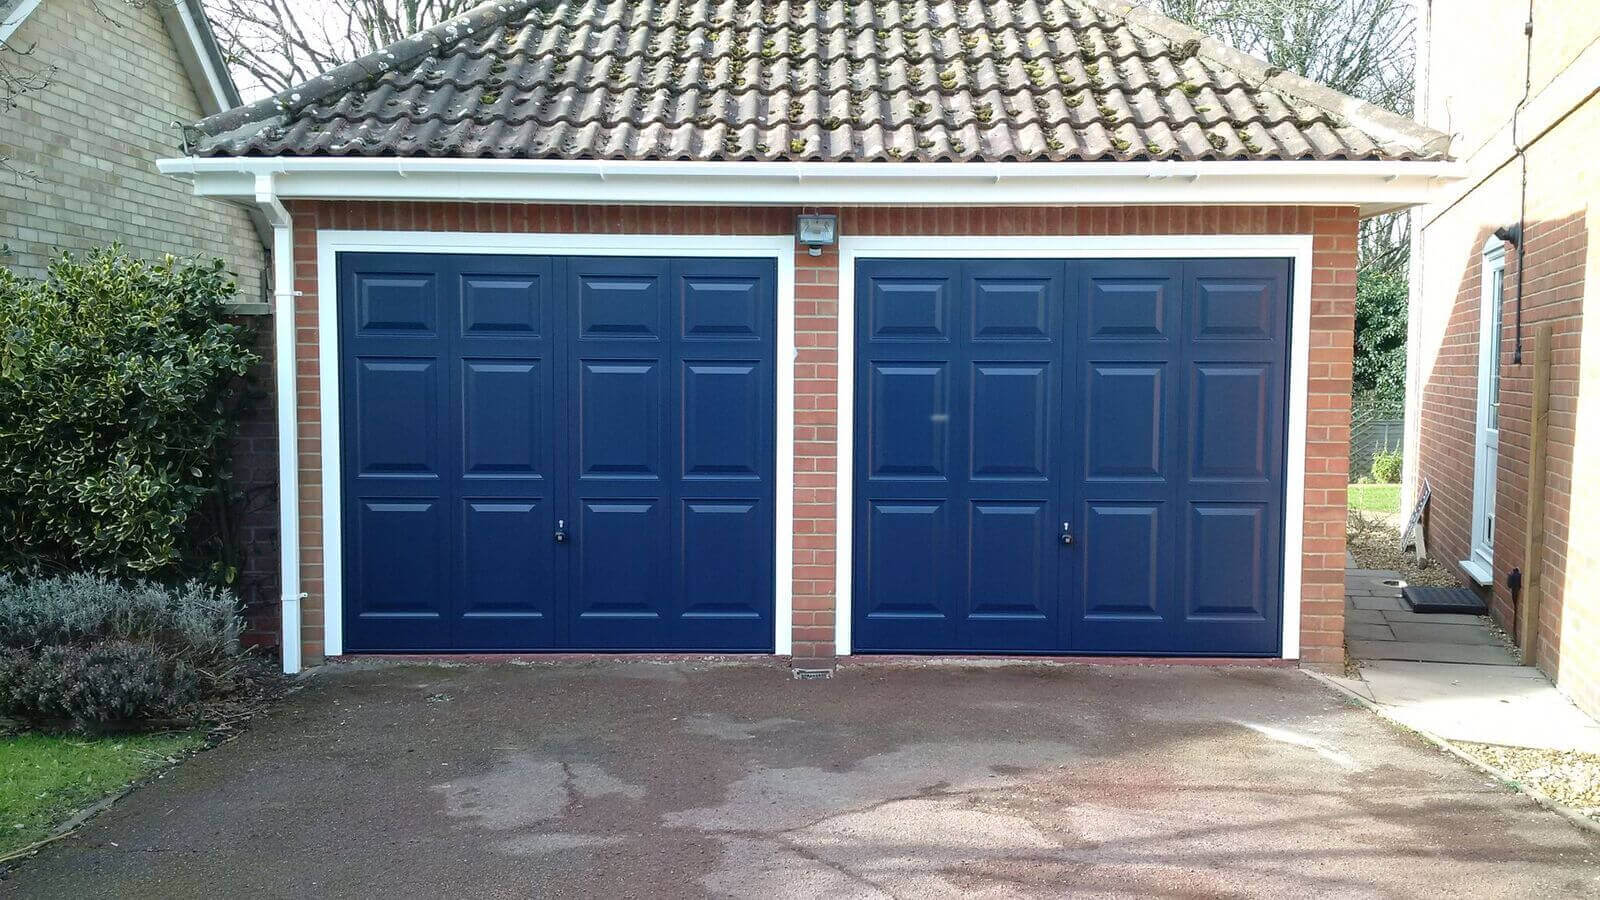 Considerations to make before purchasing a new garage door